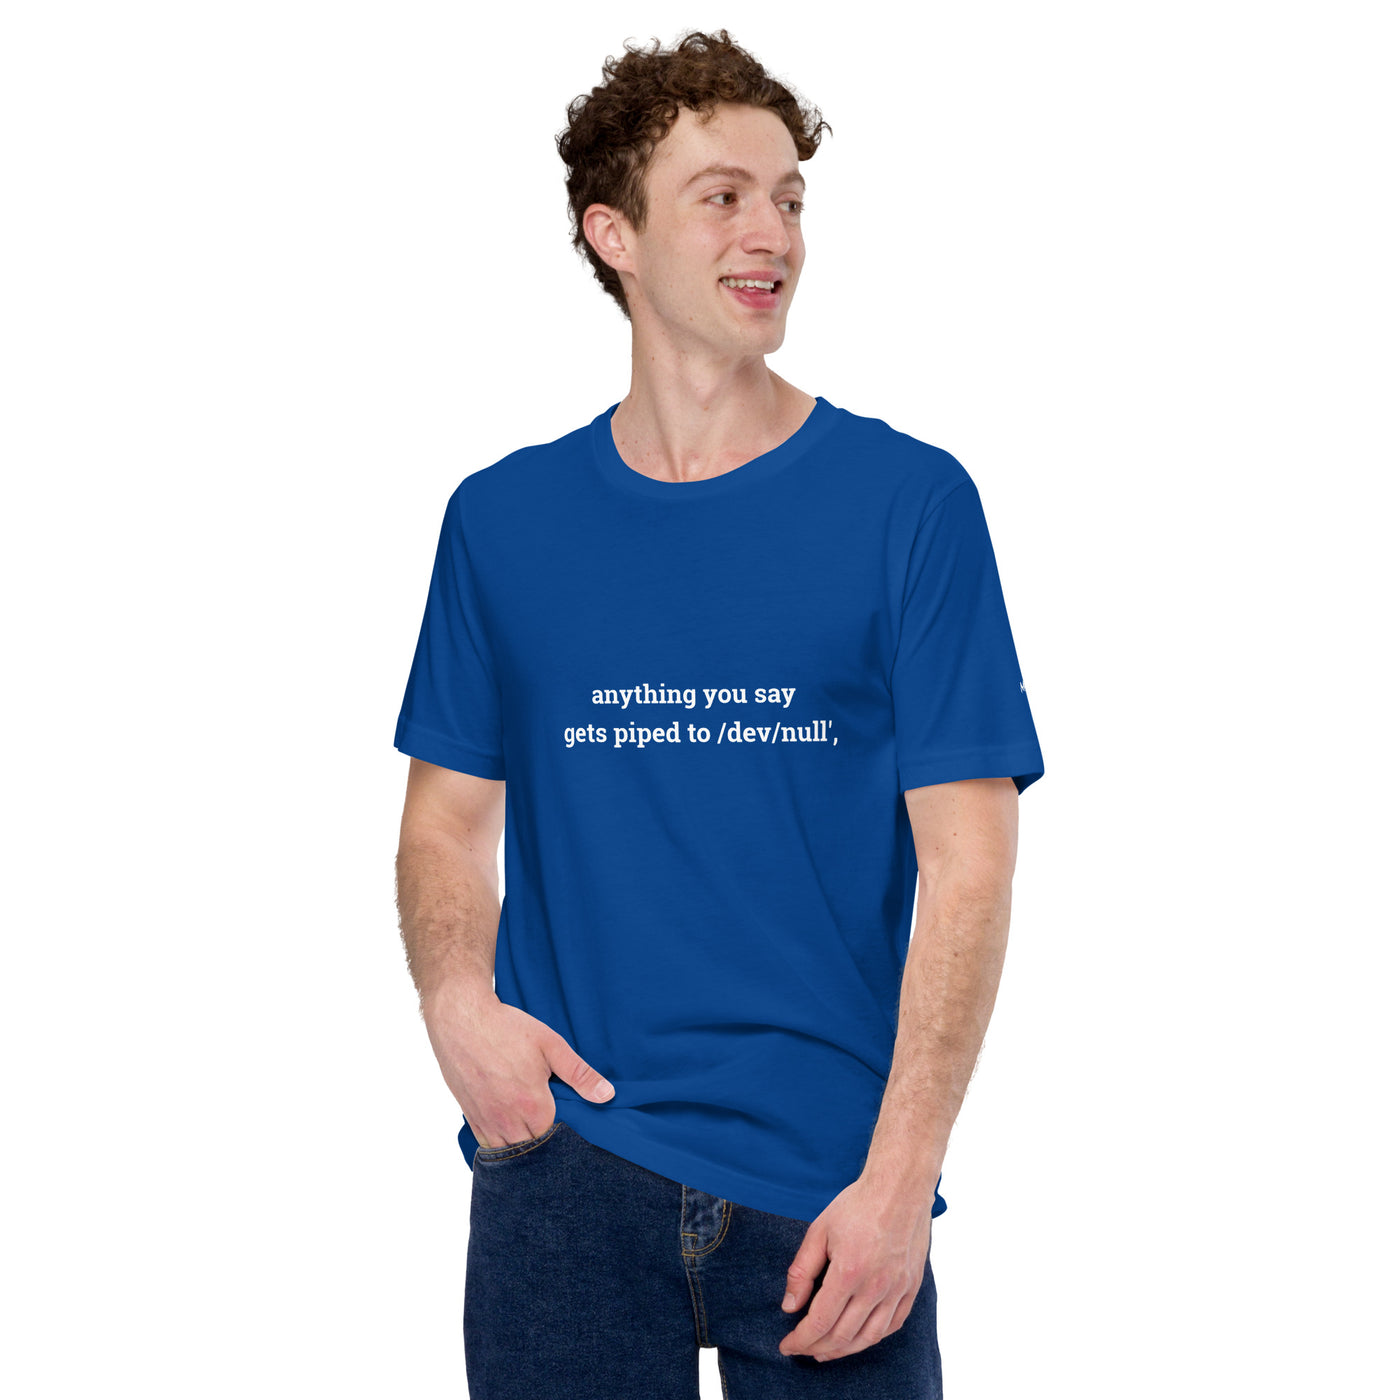 Anything you say Gets piped to devnull - Unisex t-shirt